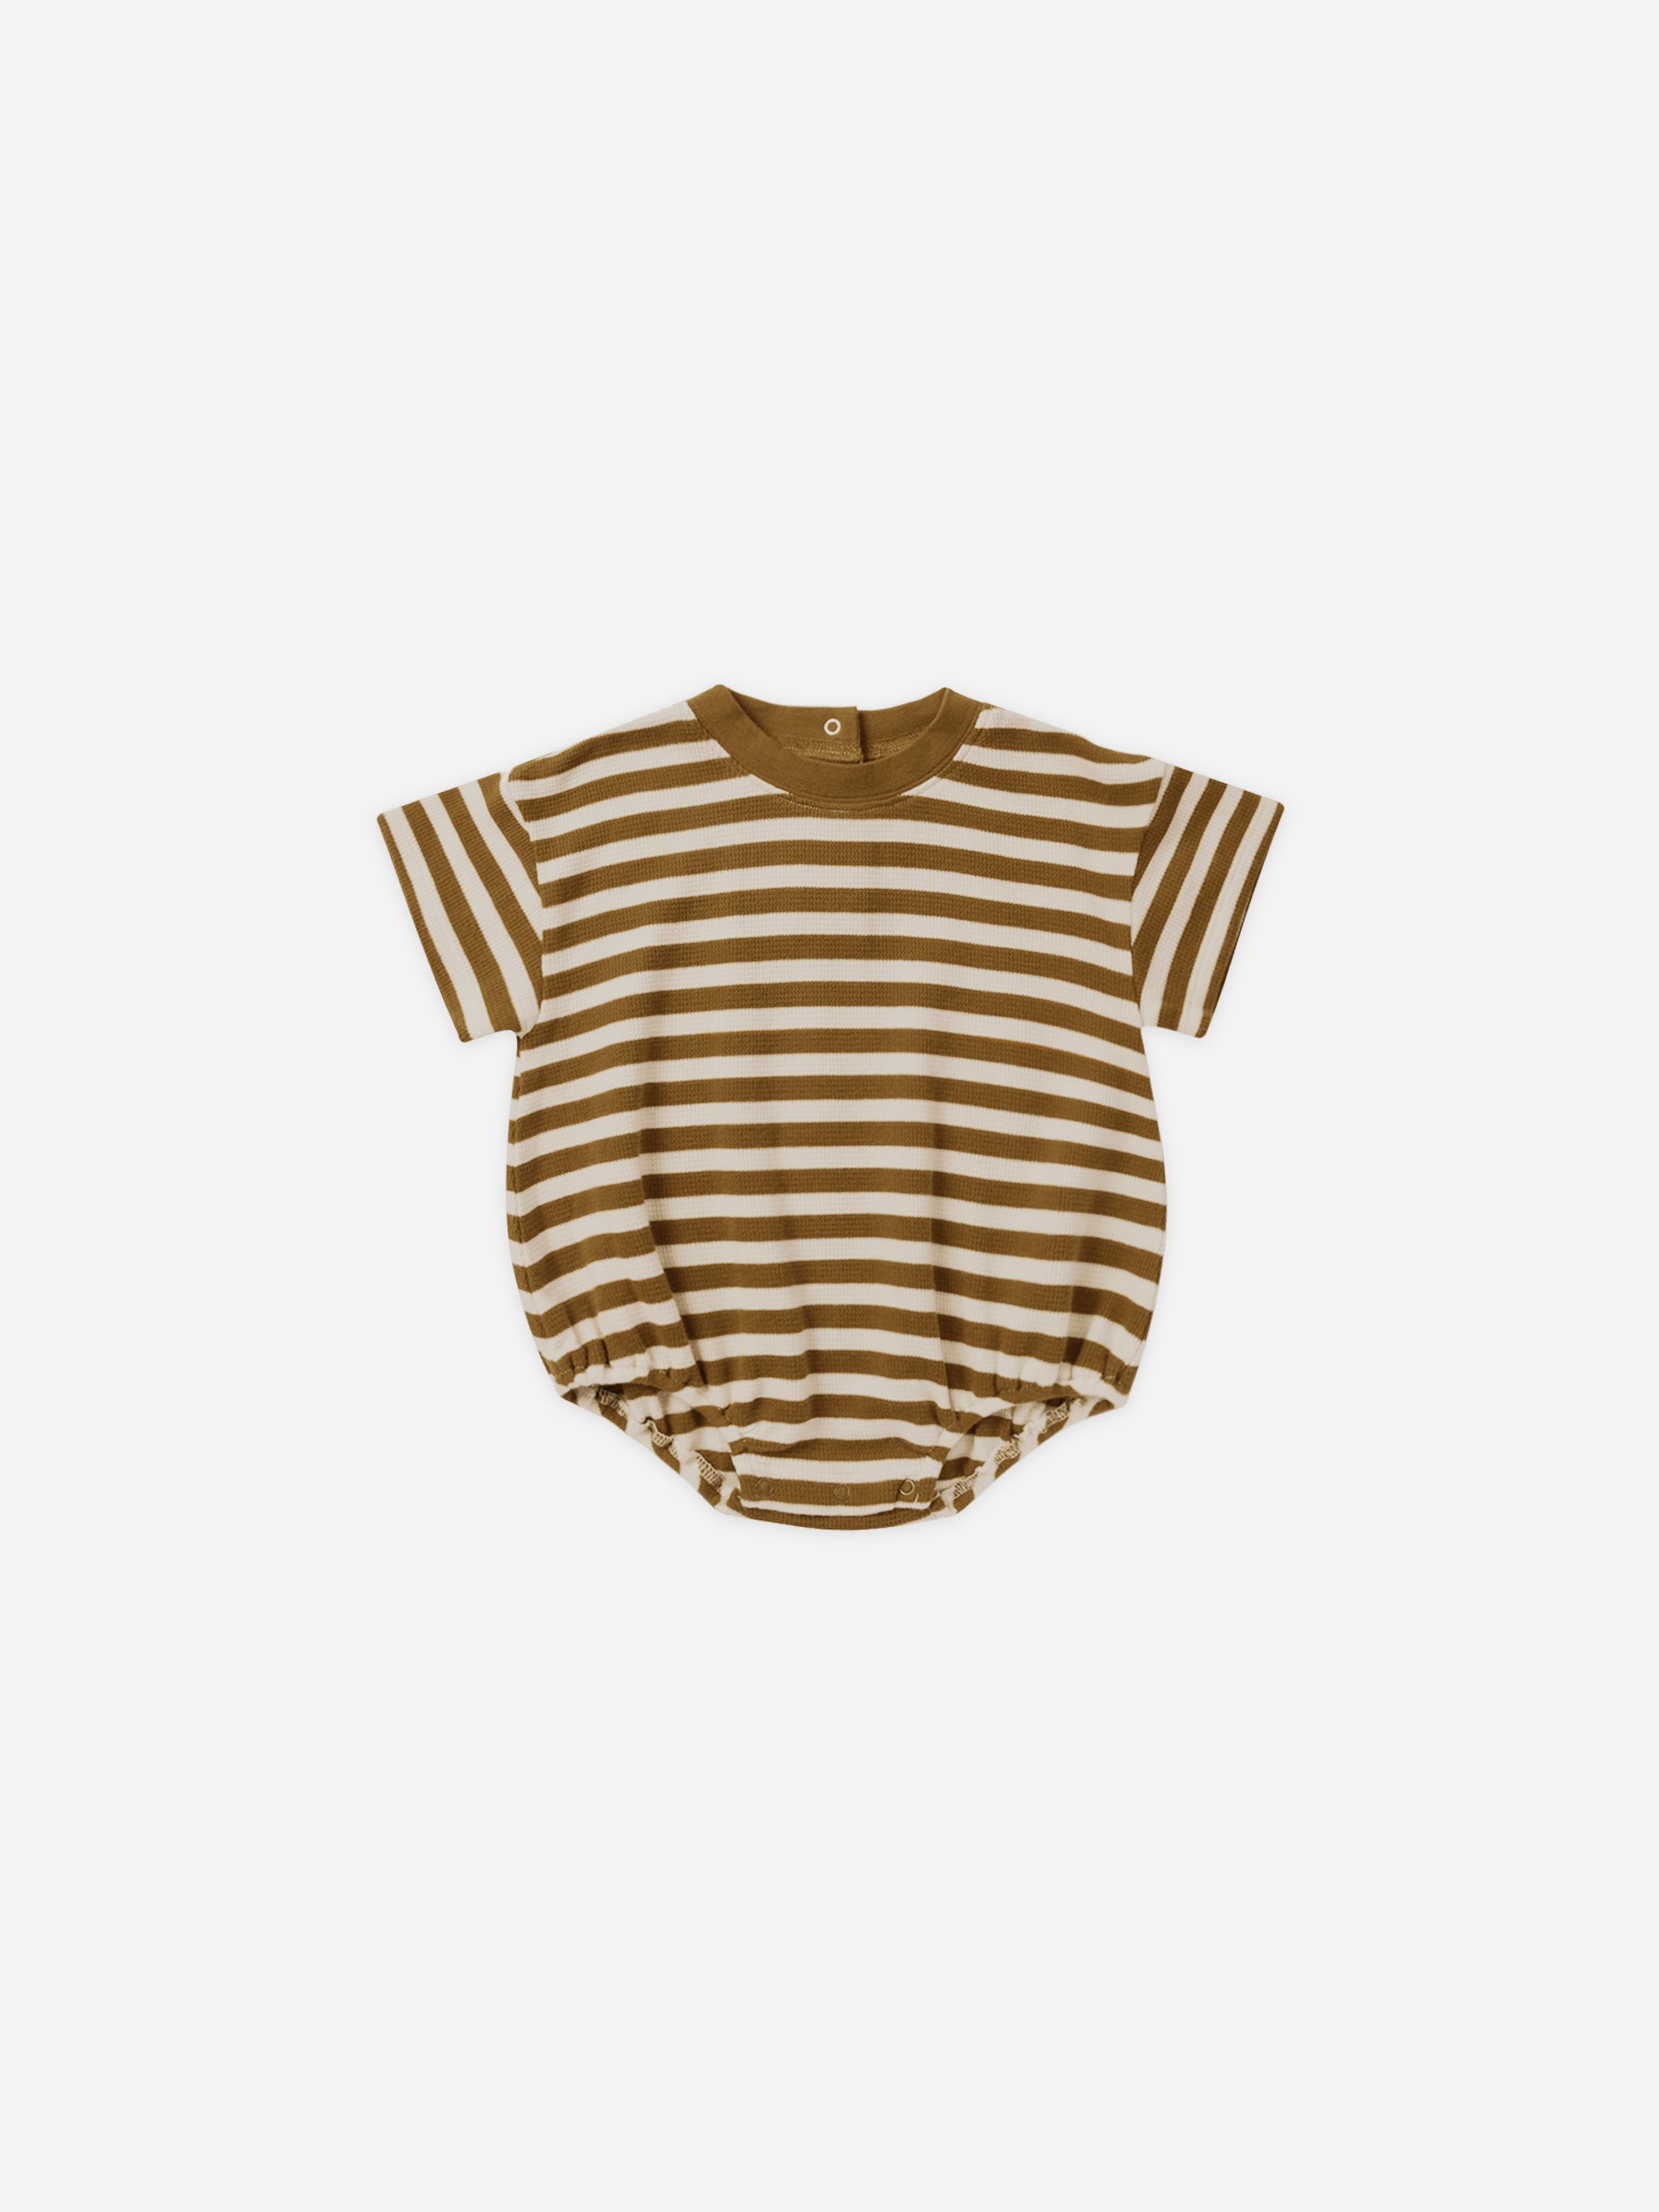 Relaxed Bubble Romper || Saddle Stripe - Rylee + Cru | Kids Clothes | Trendy Baby Clothes | Modern Infant Outfits |